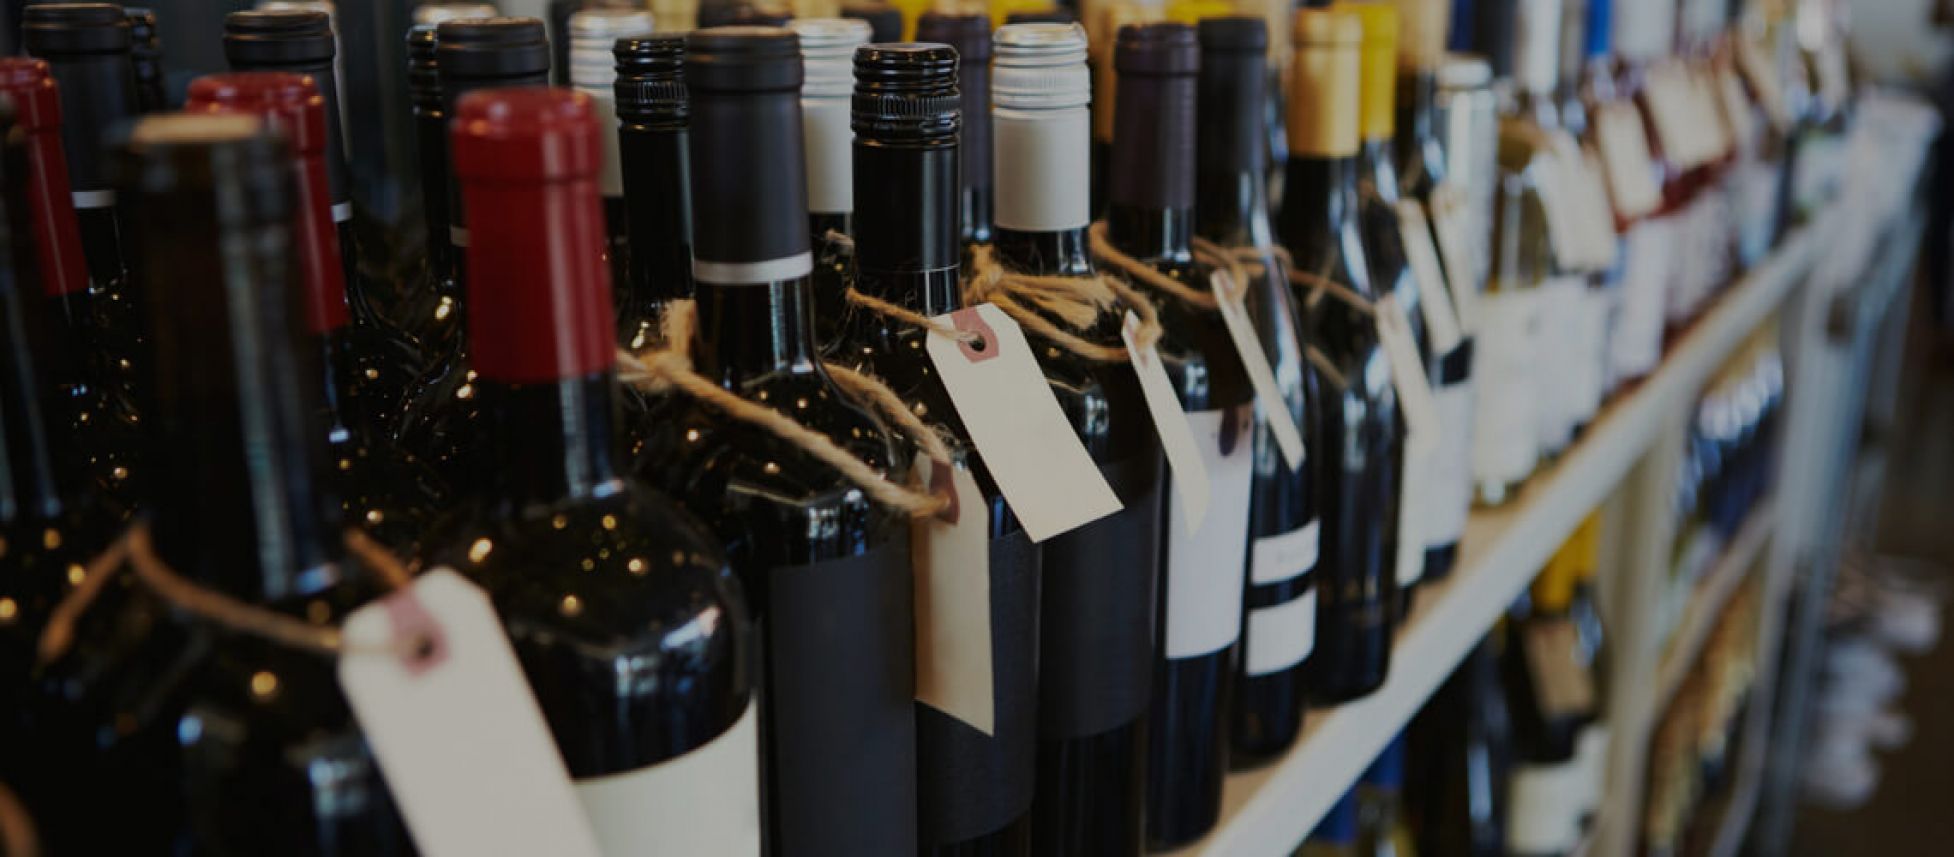 Photo for: The Private Label Wine Market in the USA